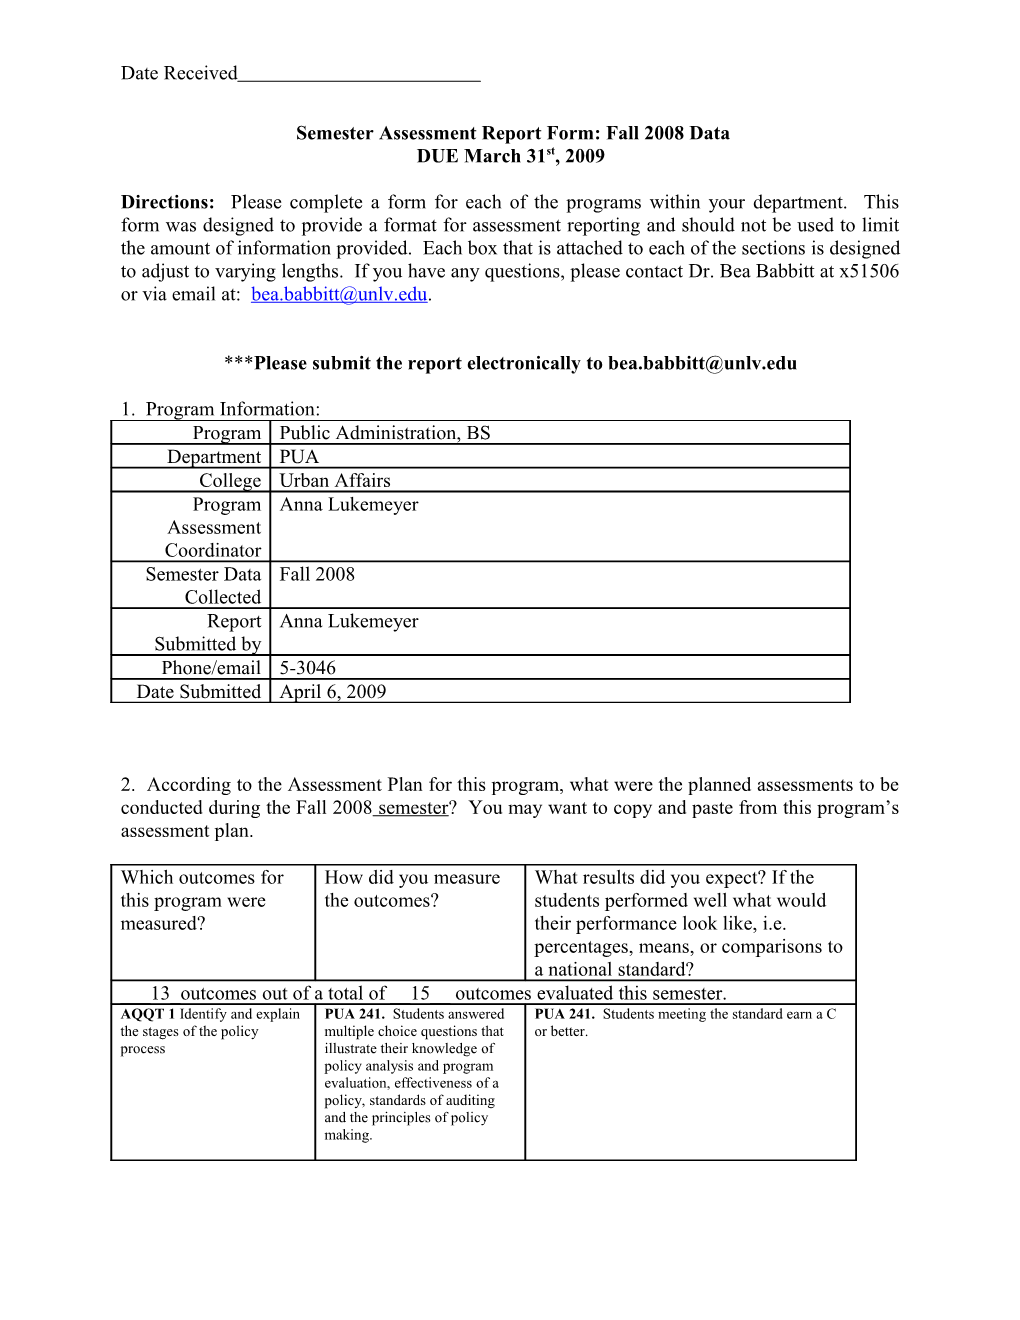 Annual Assessment Report Form for Student Learning Outcomes Assessment